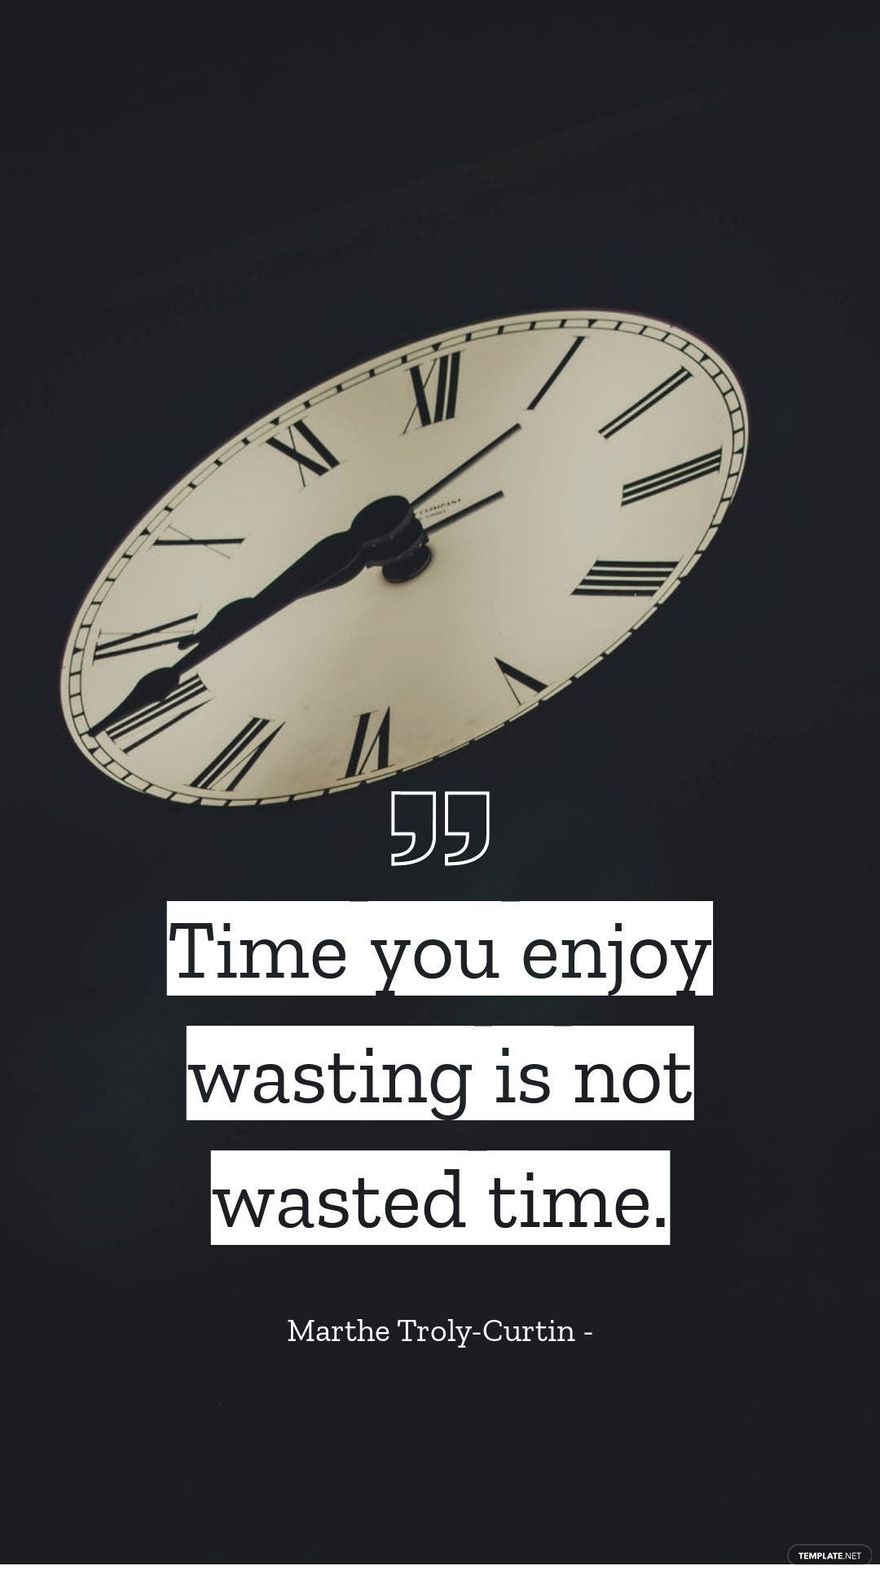 Marthe Troly-Curtin - Time you enjoy wasting is not wasted time.